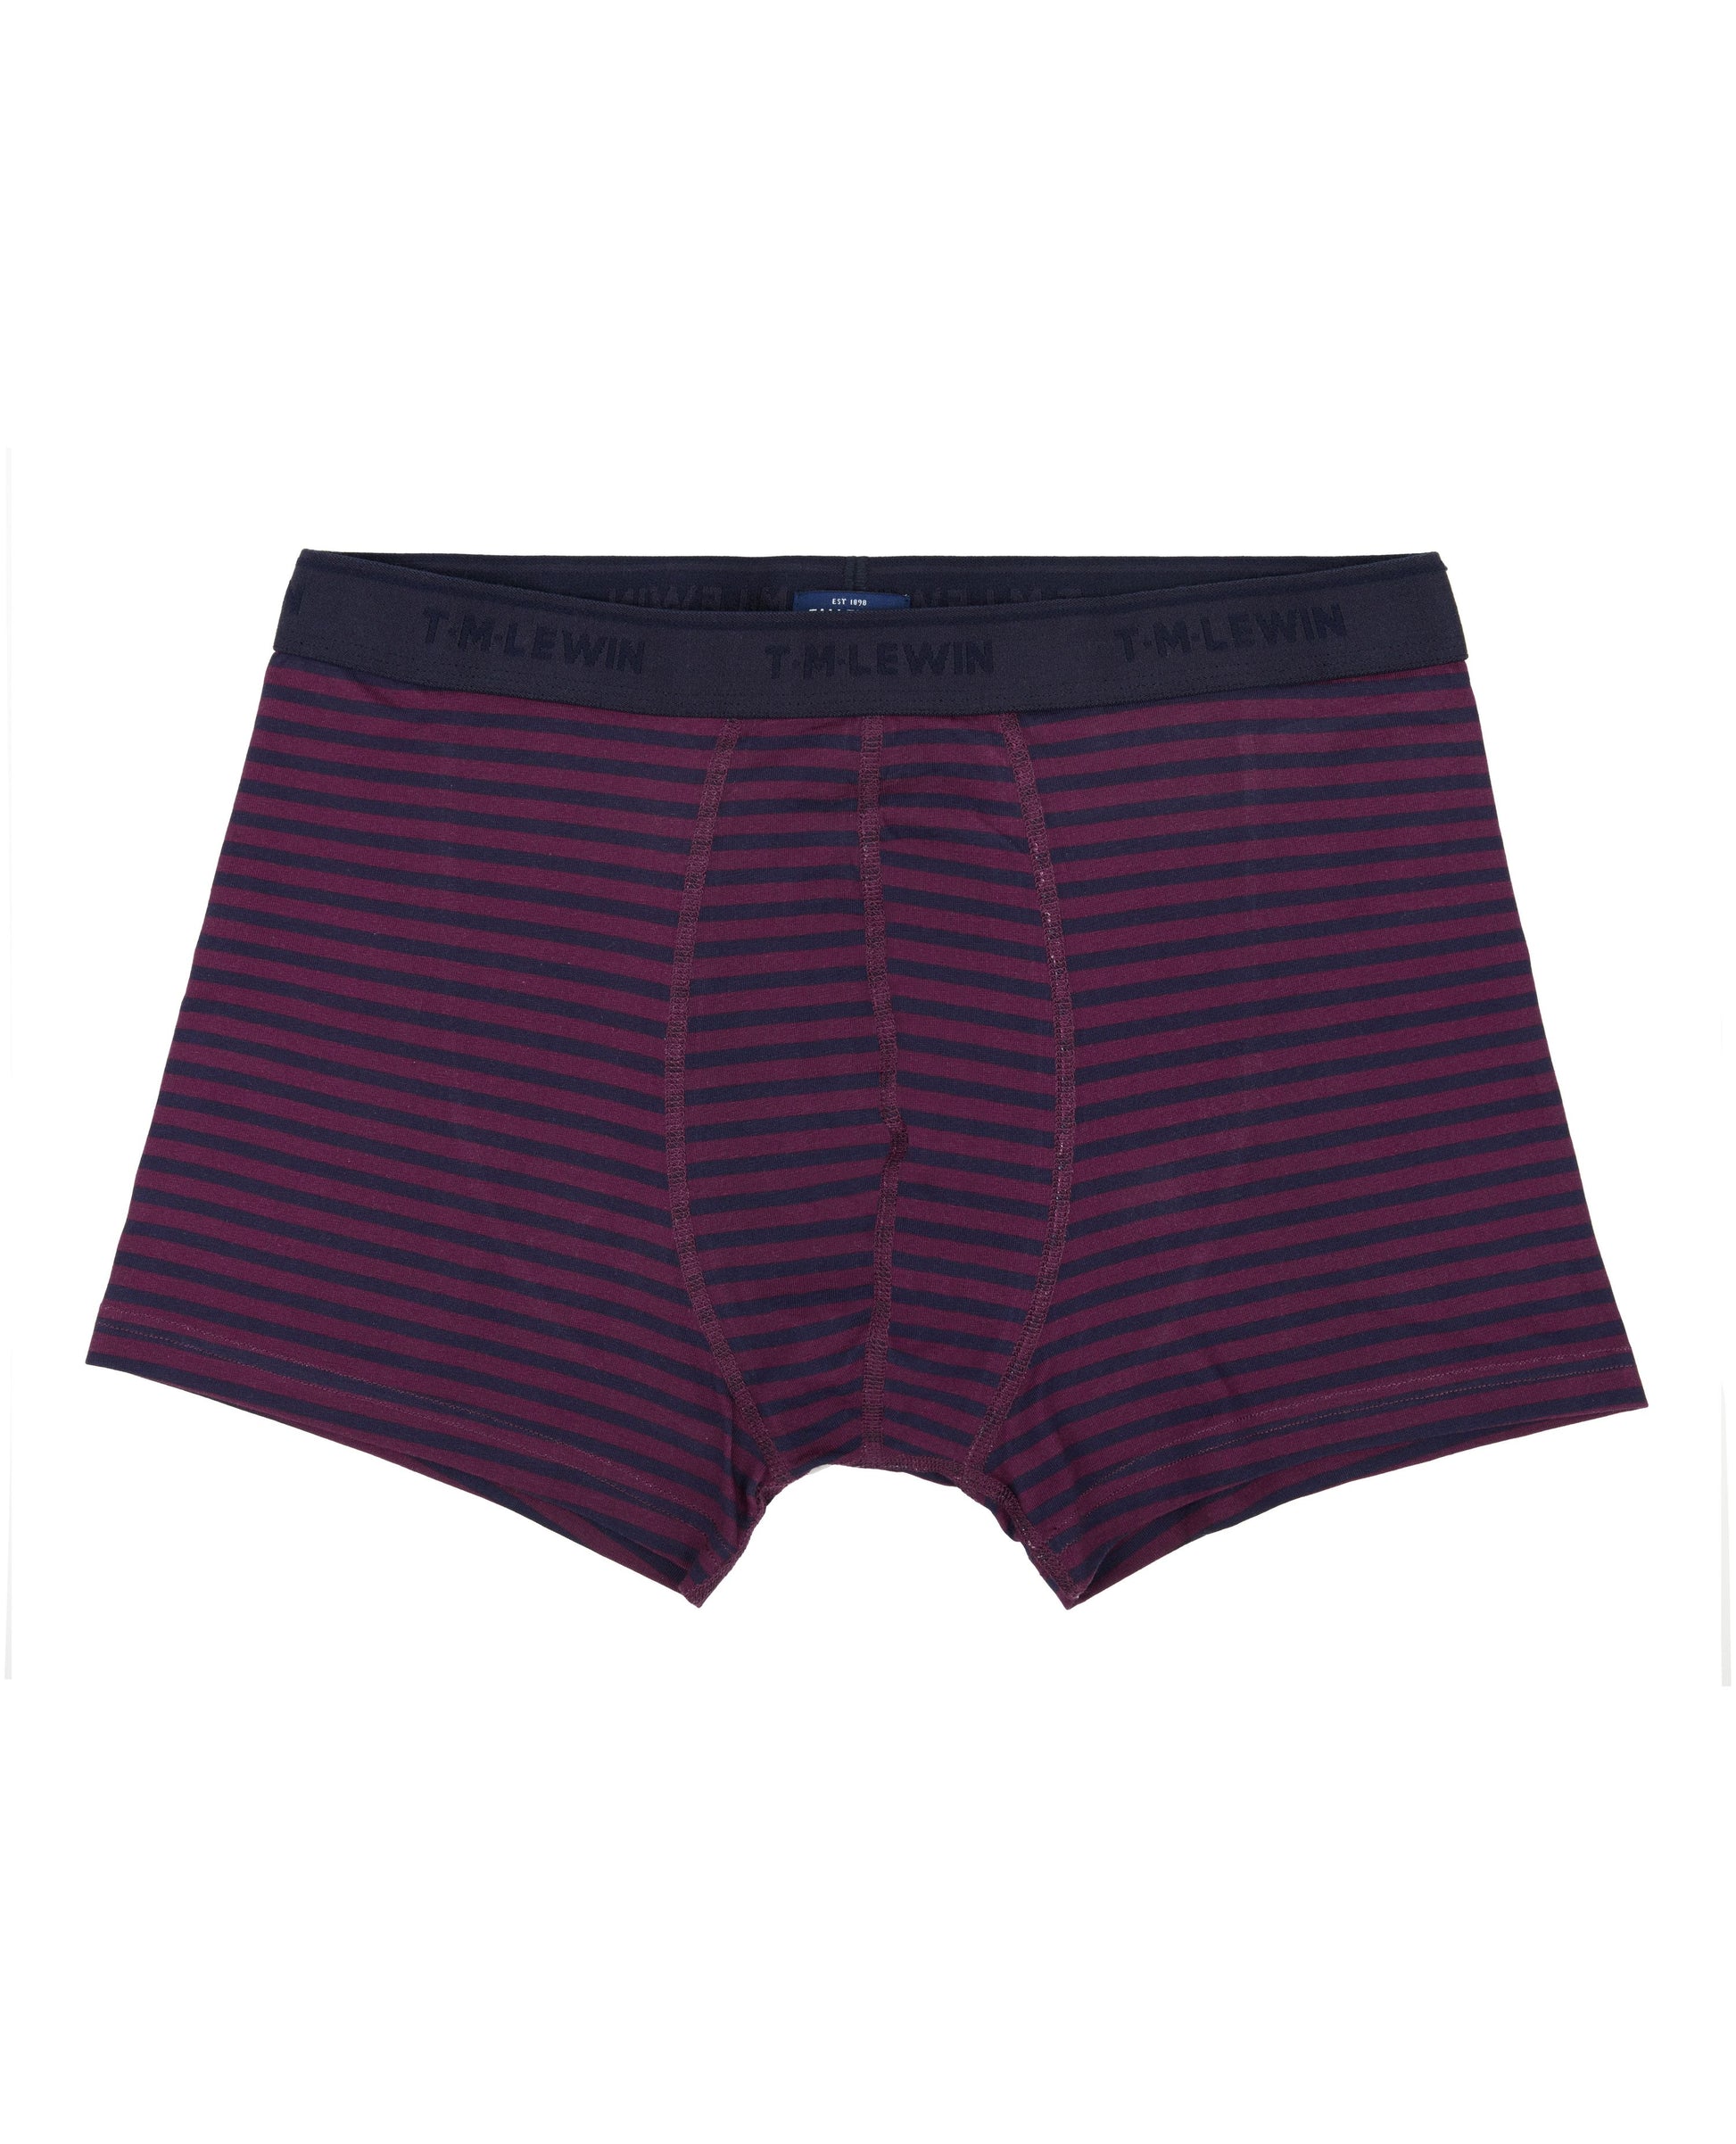 Image 1 of Navy and Burgundy Stripe Cotton Blend Boxers